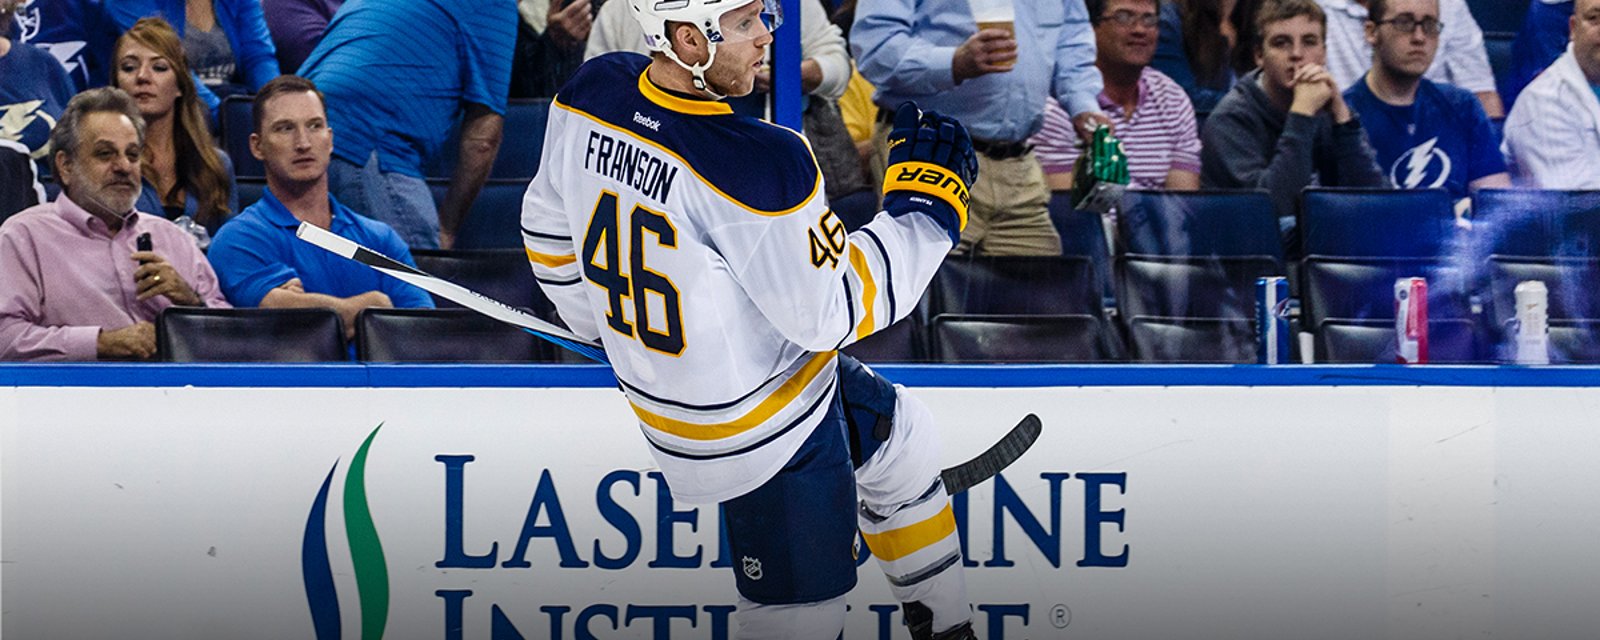 Your Call: Should the Rangers sign Cody Franson?